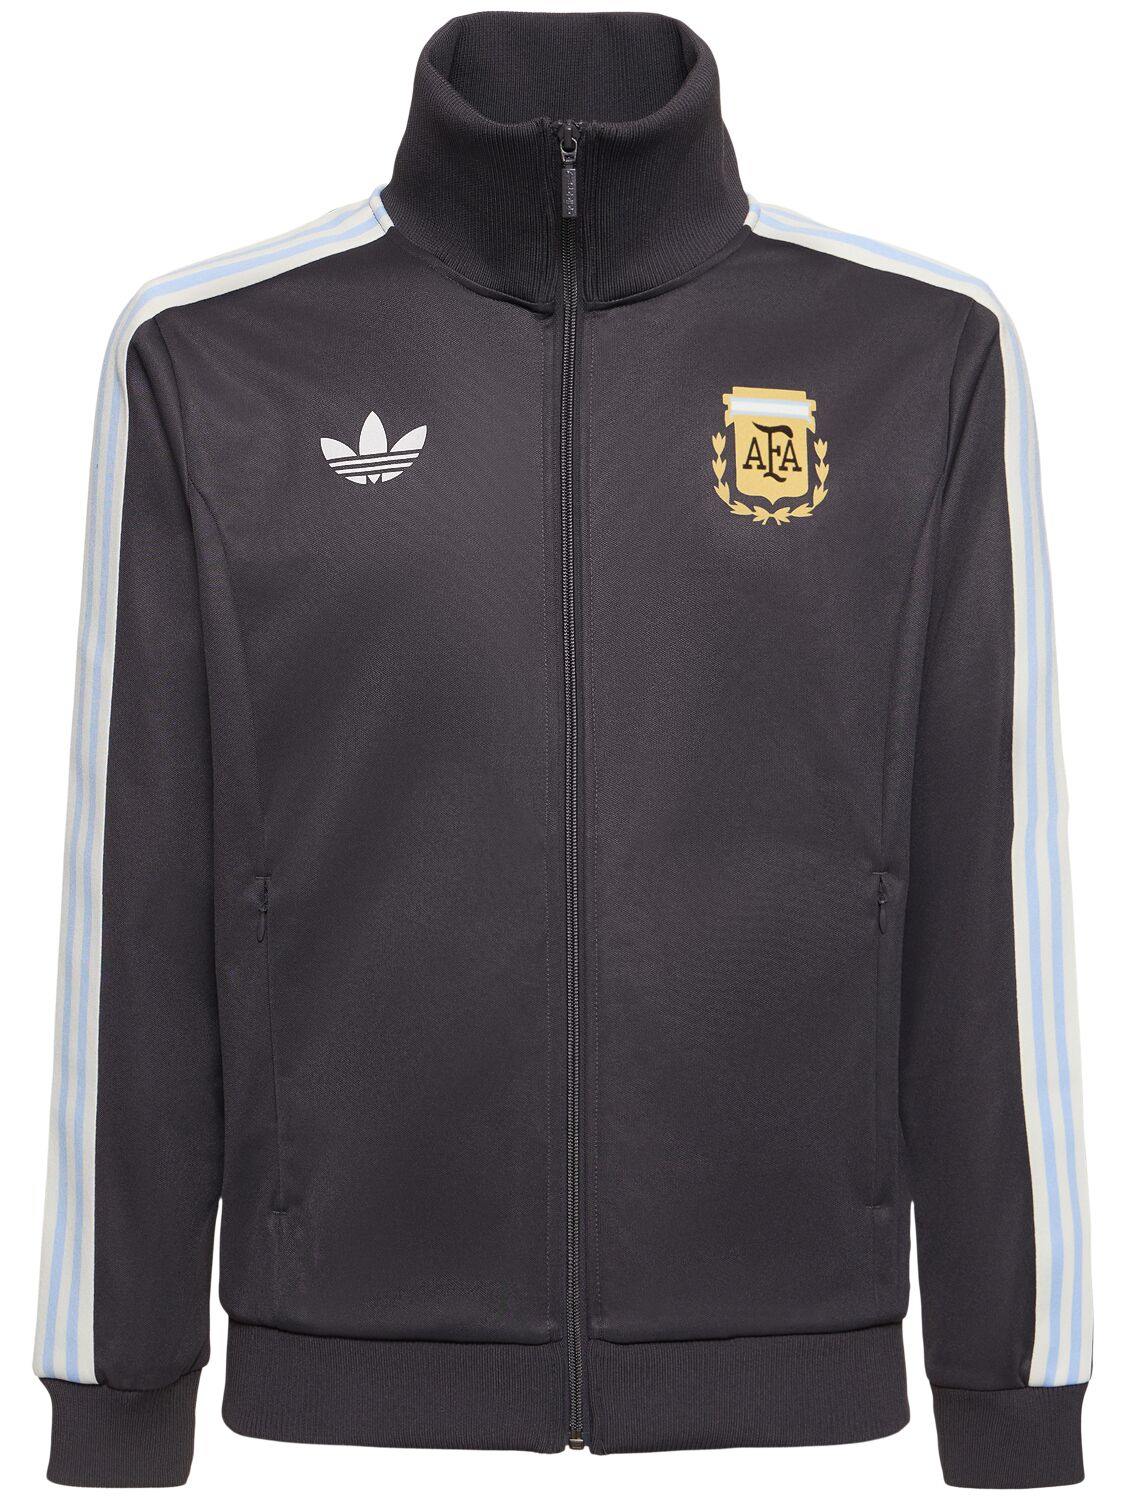 Image of Argentina Track Top